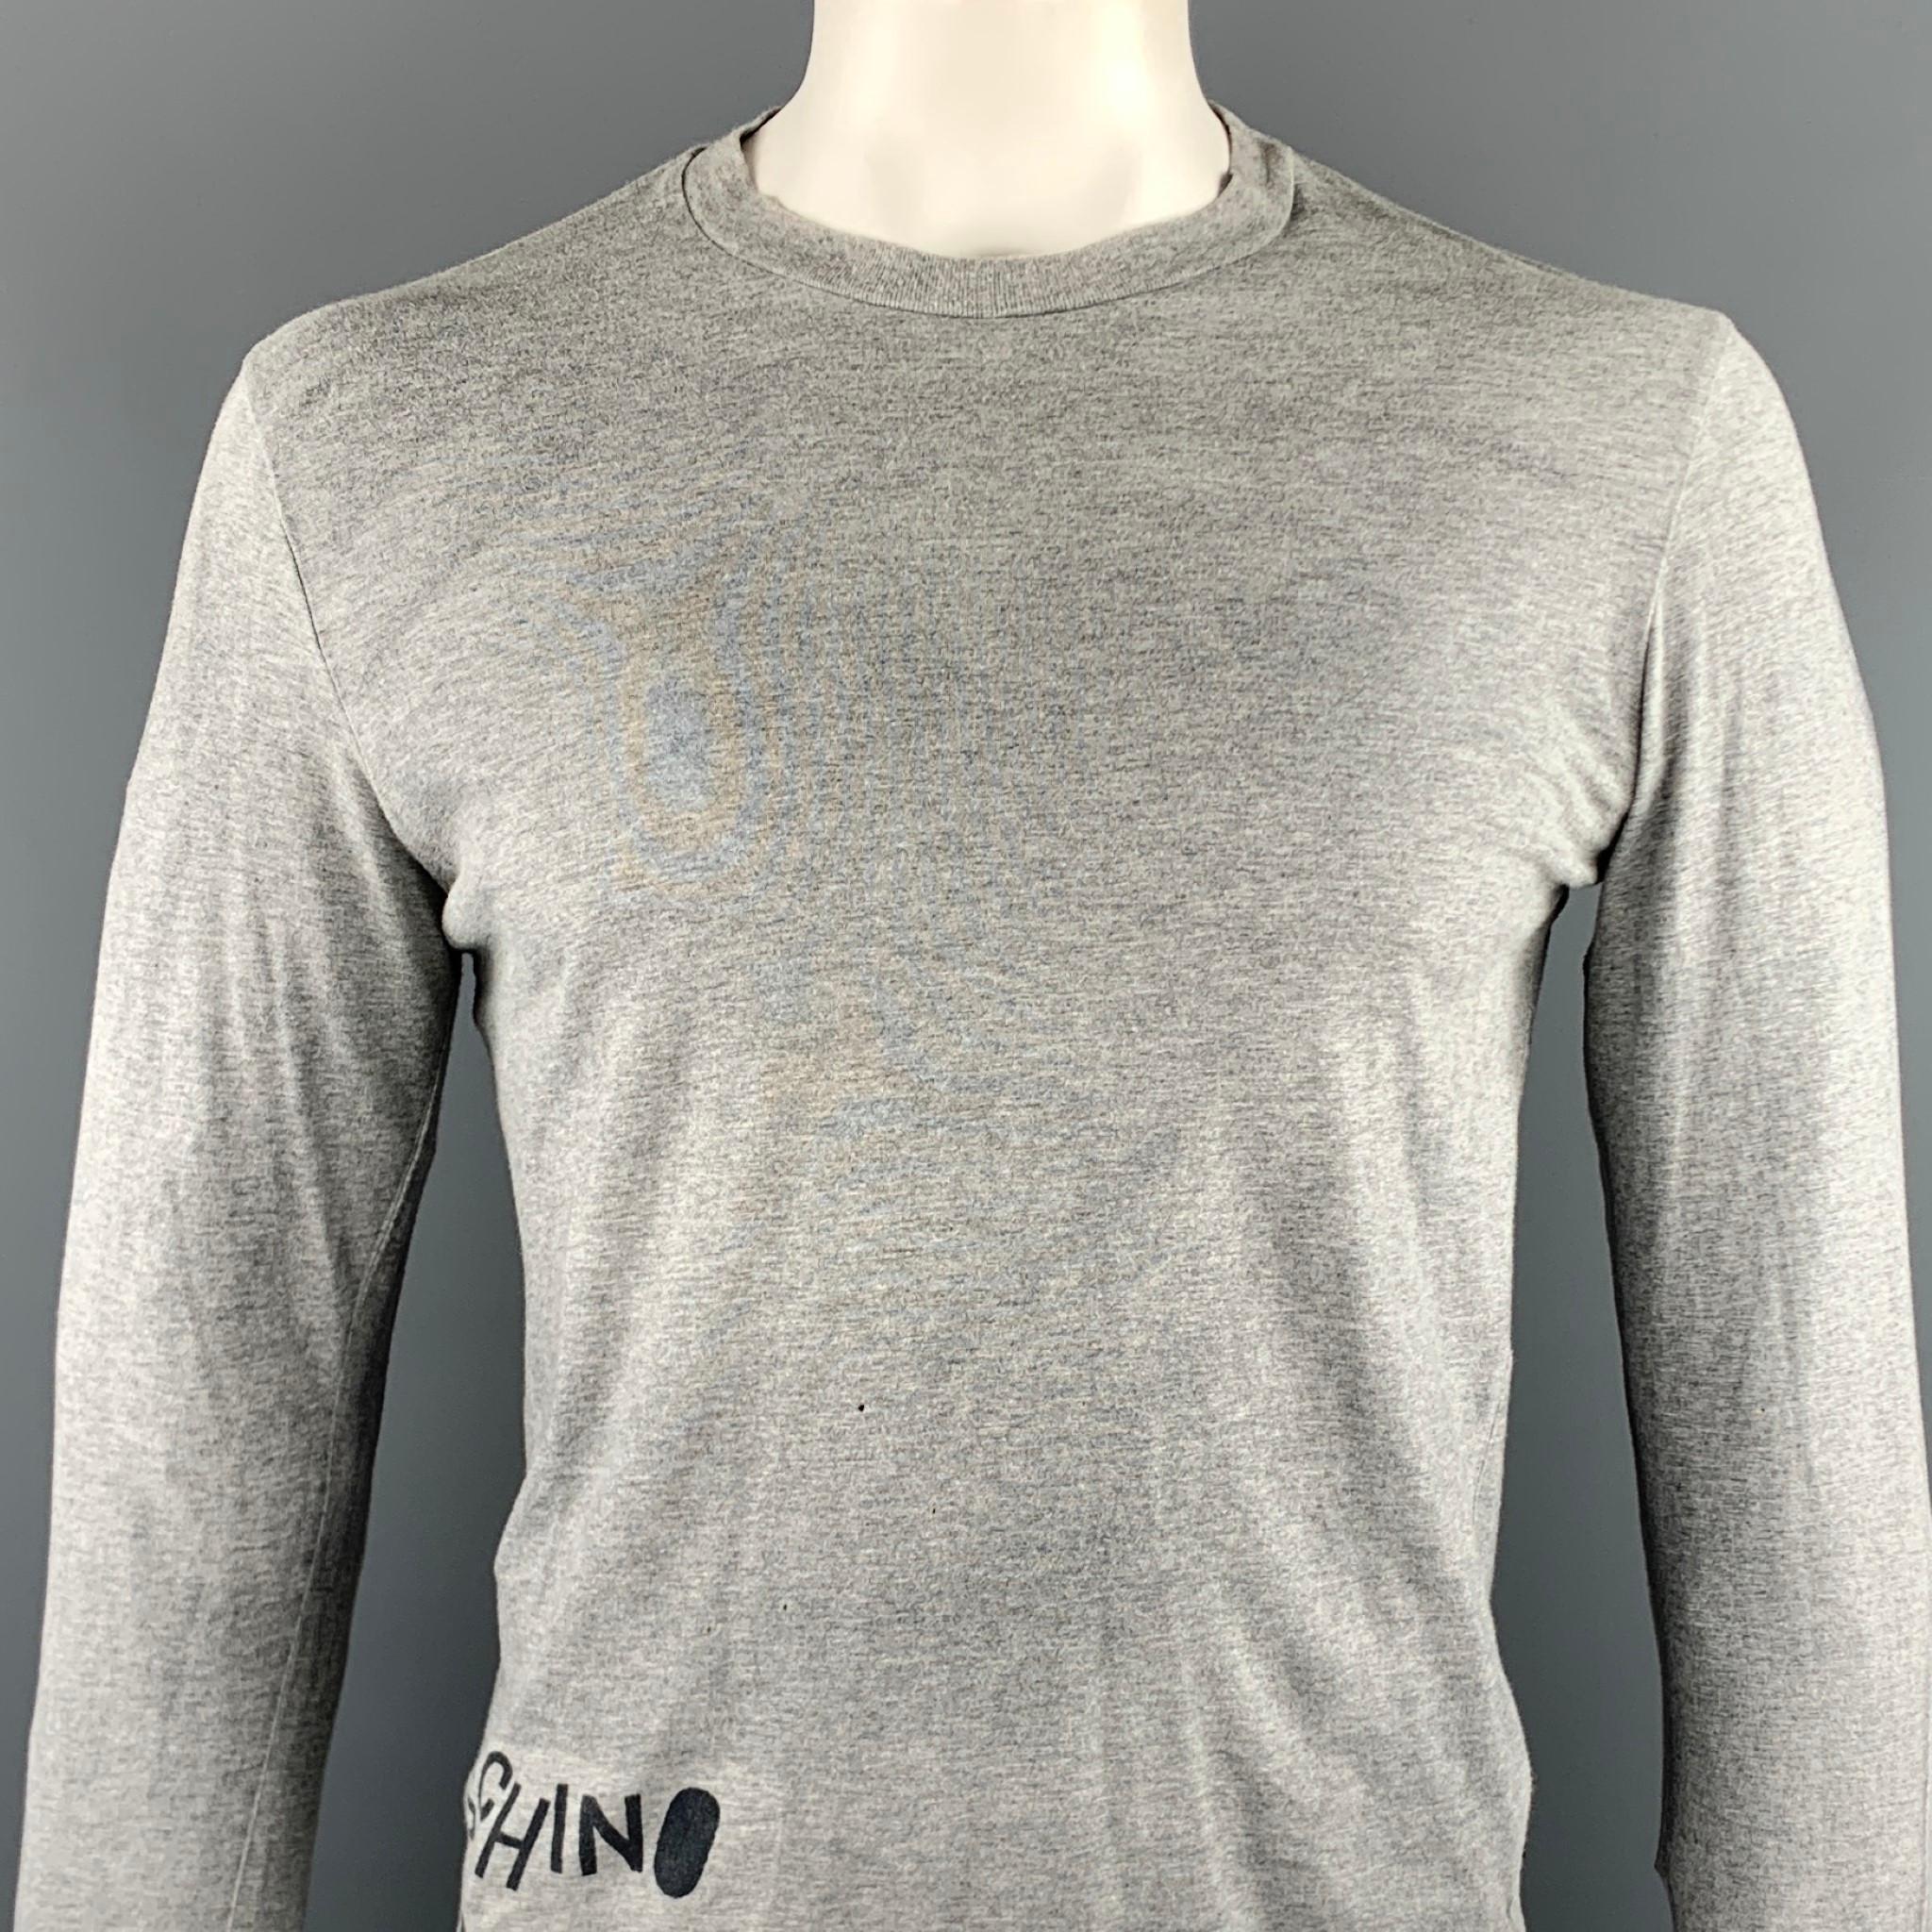 Vintage MOSCHINO JEANS long sleeve t-shirt comes in a gray cotton featuring front & back graphic details and a crew-neck. Minor discoloration. As-Is. Made in Italy.

Very Good Pre-Owned Condition.
Marked: L

Measurements:

Shoulder: 18 in. 
Chest: